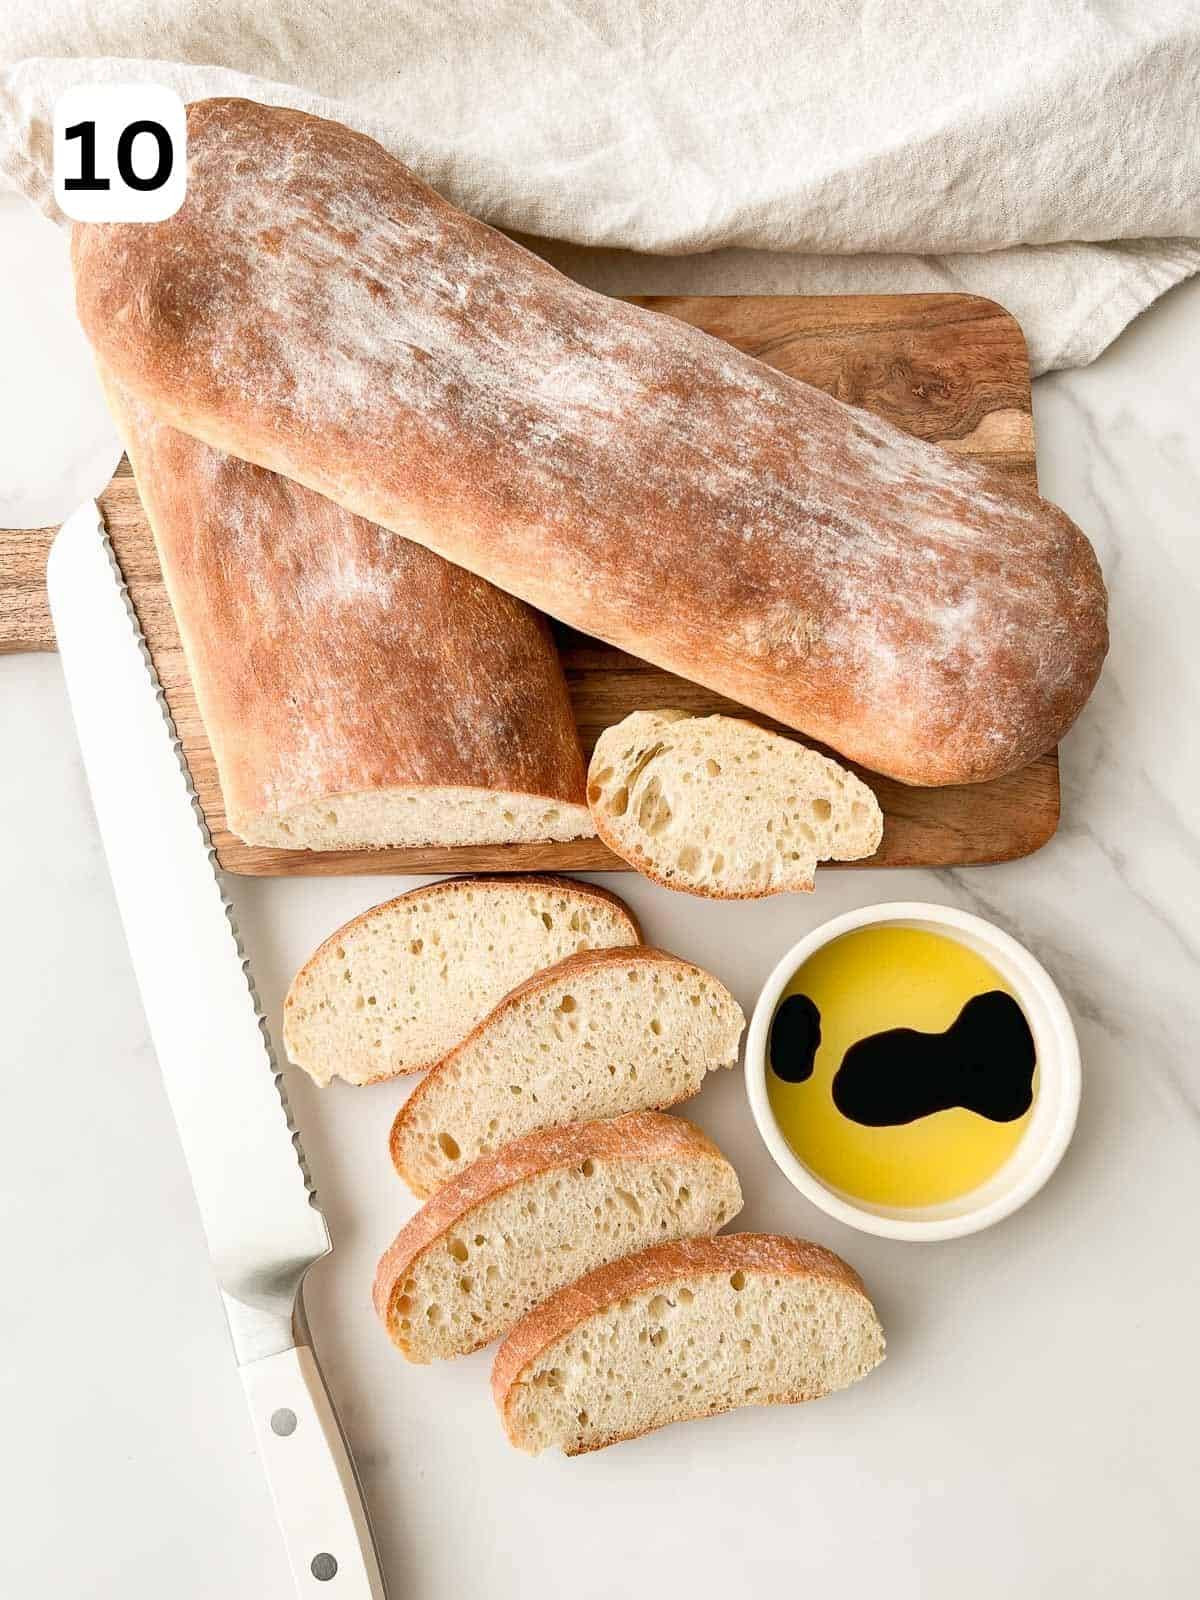 The bread is sliced and served.